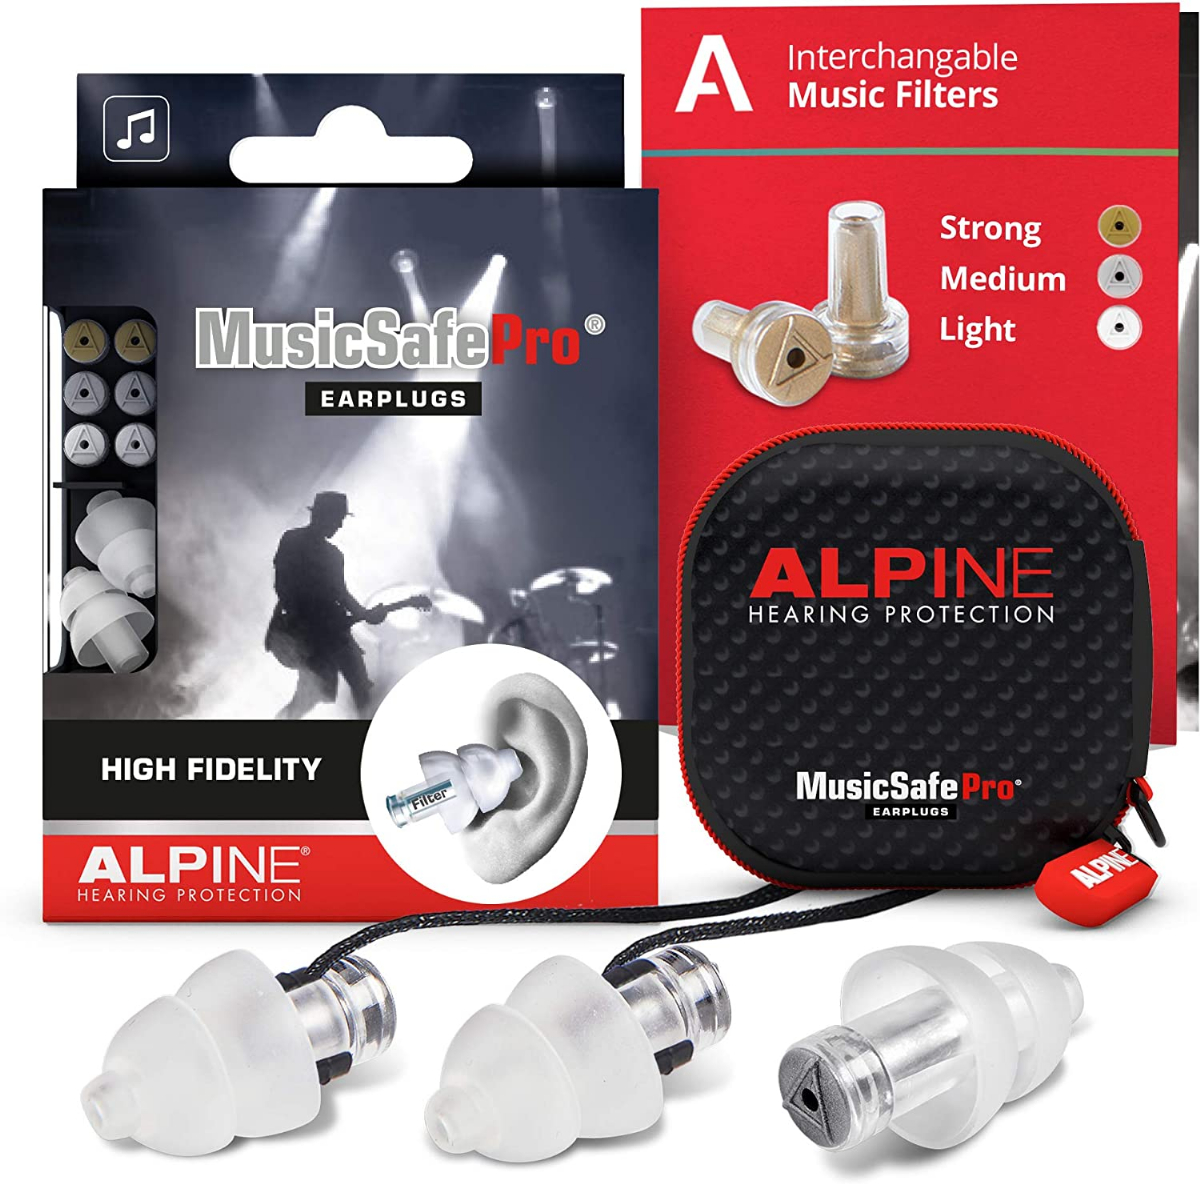 Alpine SoftSilicone Moldable Silicone Putty Ear Plugs - Noise Reducing  Earplugs for Sleeping, Swimming, & Concentrating - Comfortable Snoring  Solution